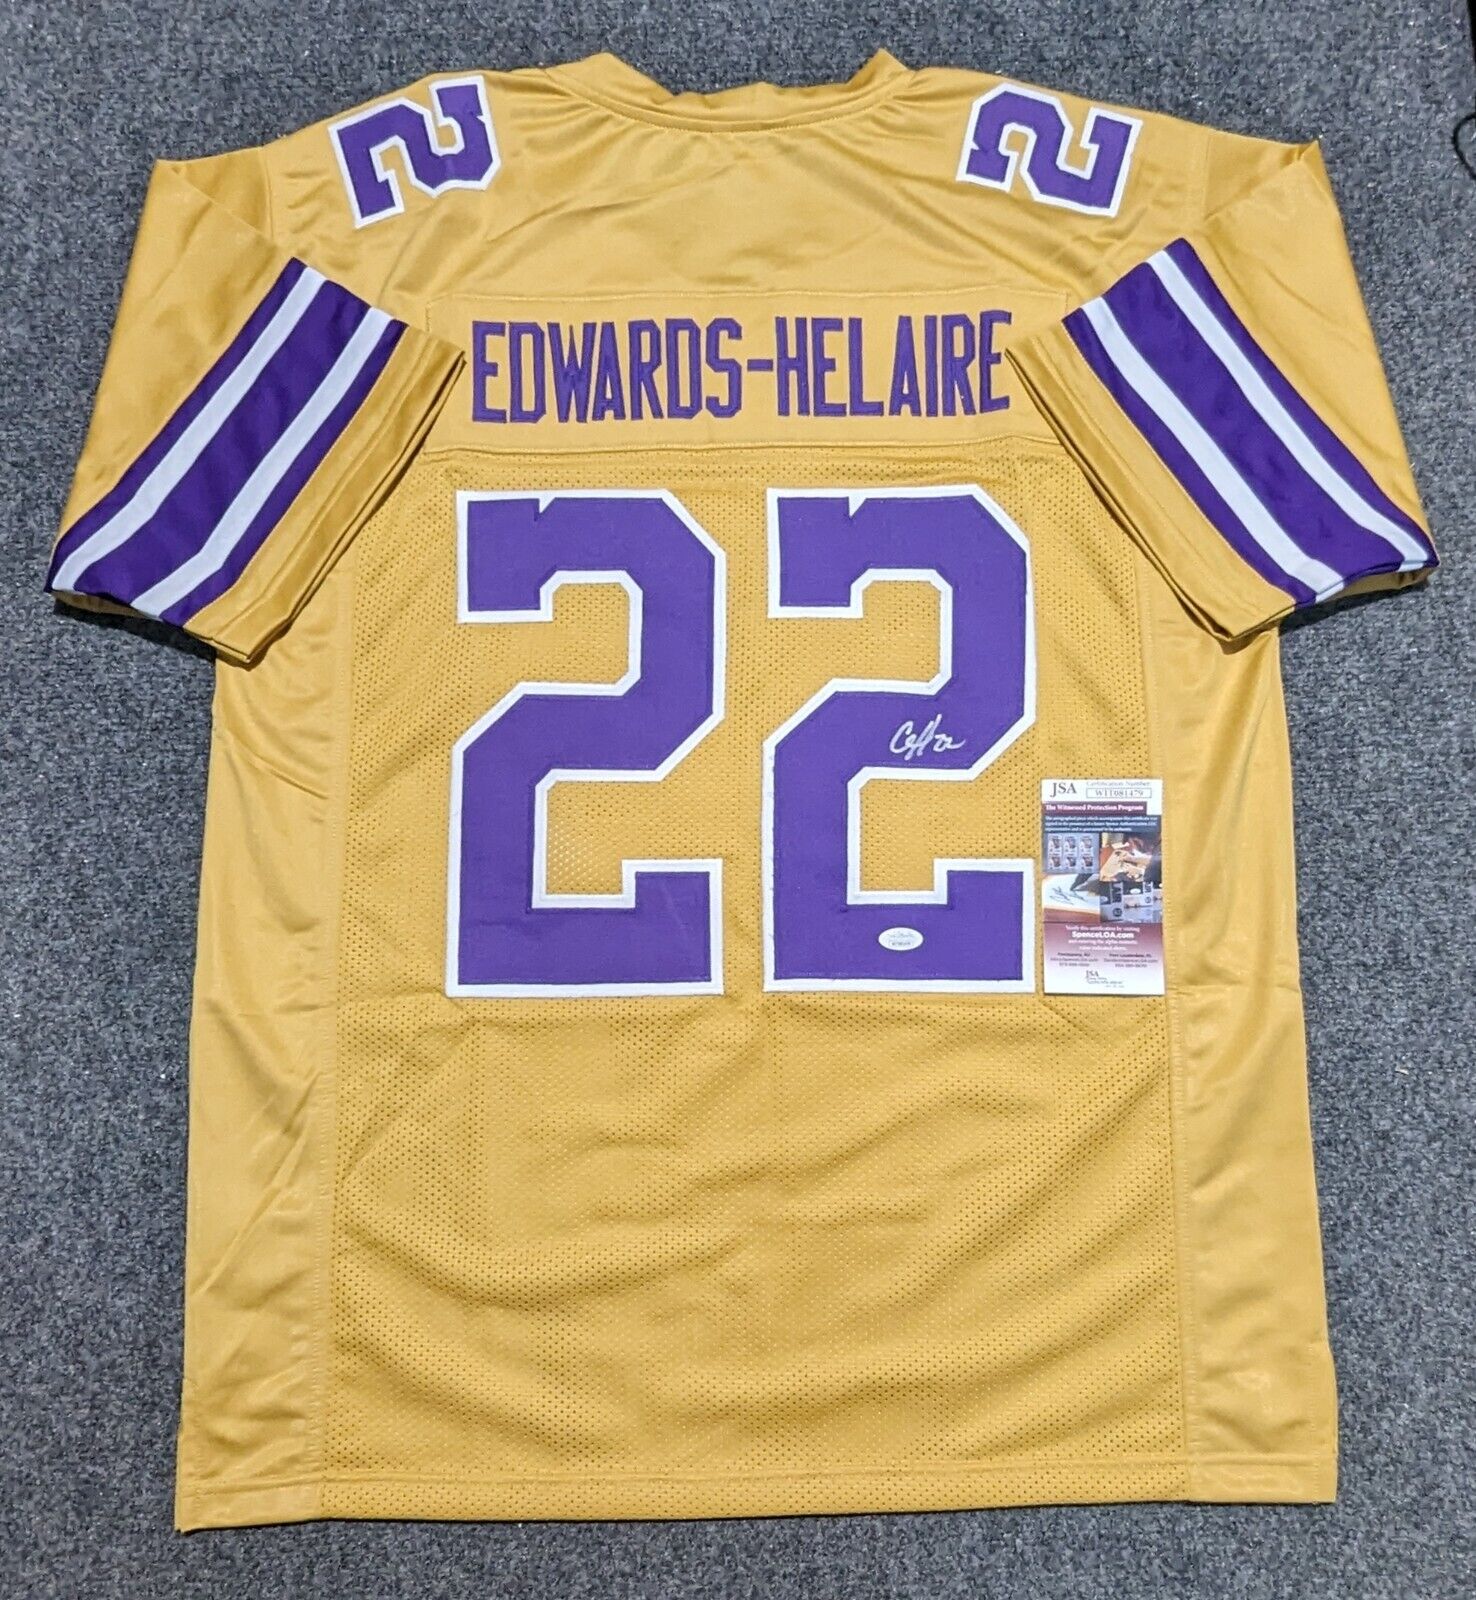 MVP Authentics Lsu Tigers Clyde Edwards-Helaire Autographed Signed Jersey Jsa Coa 152.10 sports jersey framing , jersey framing